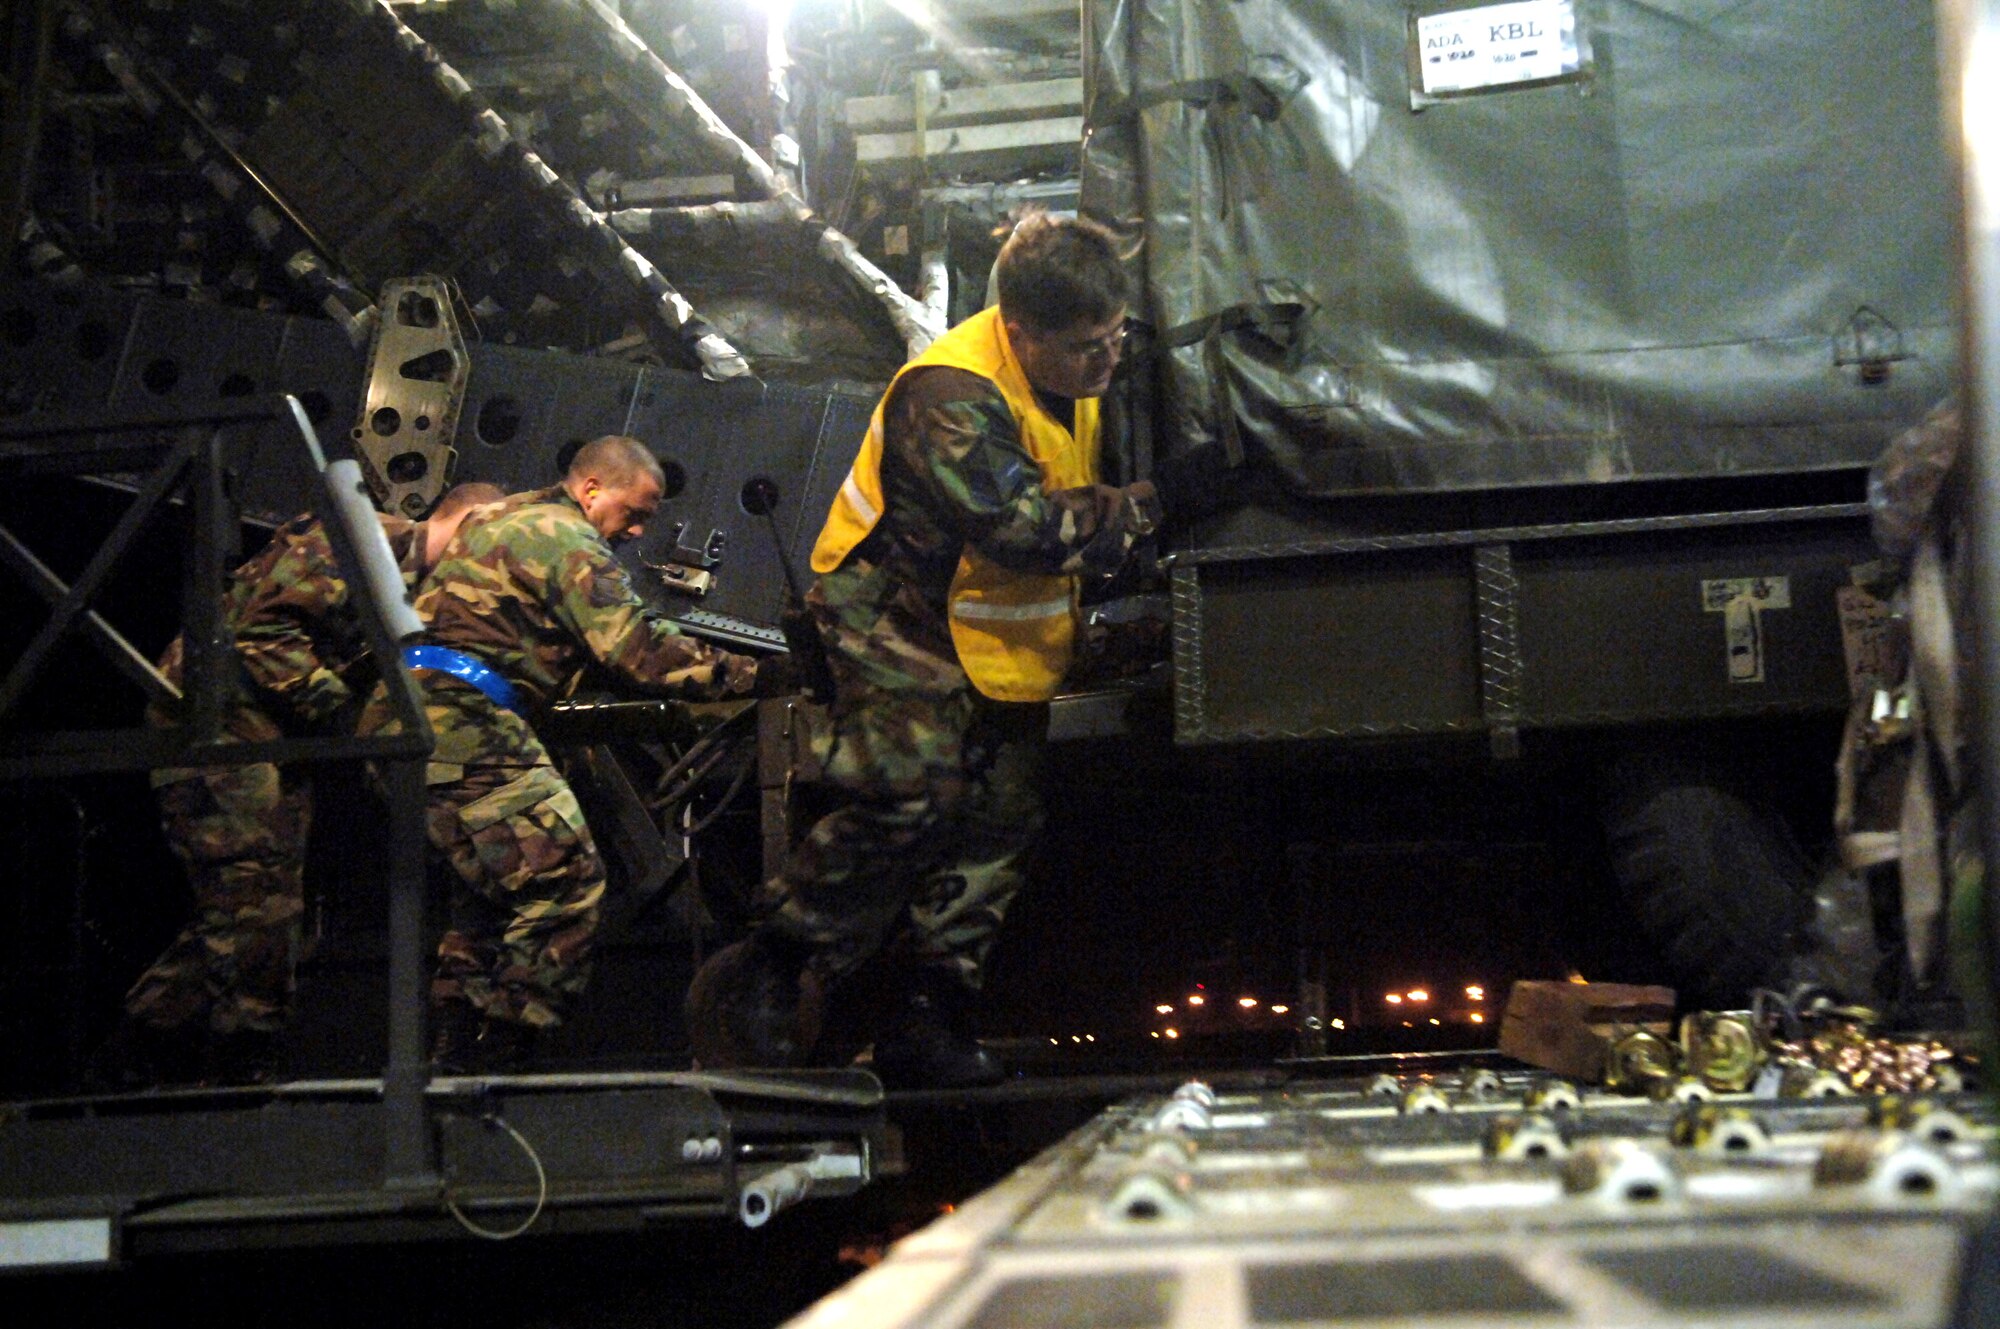 Master Sgt. James Triplett, Staff Sgt. Robert Izzett and Airman 1st Class Thomas Hickey load a trailer onto a C-17 Globemaster III Feb. 20 at Incirlik Air Base, Turkey. Turkish and U.S. Air Forces' joint effort provided 94,000 pounds of supplies and equipment for the Afghan army to use in the war on terrorism. The Airmen are assigned to the 728th Air Mobility Squadron. (U.S. Air Force photo/Airman 1st Class Nathan W. Lipscomb)